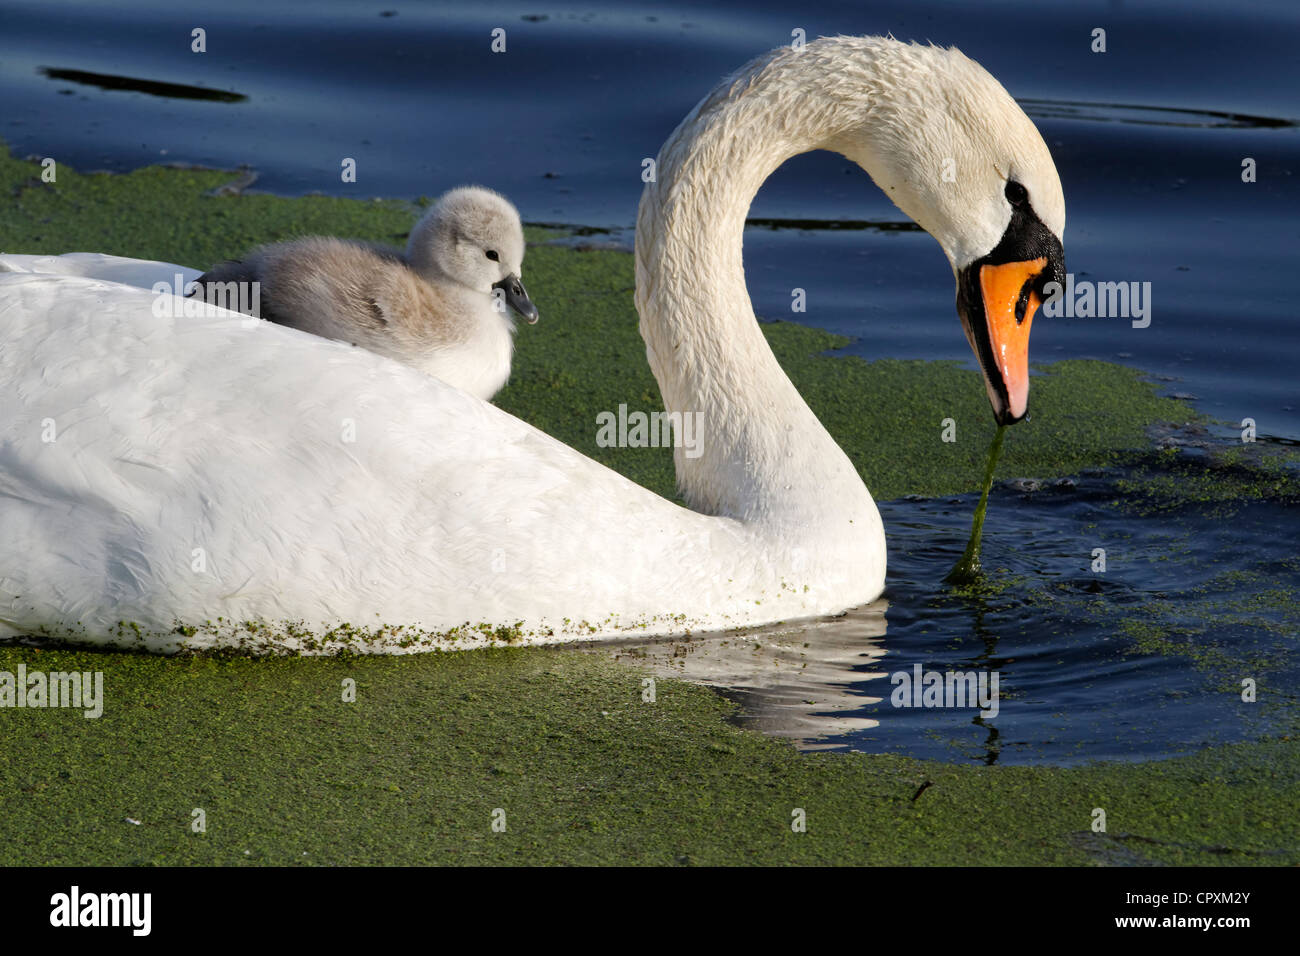 Mute swan, Cygnus olor, Female with young on back, London, May 2012 Stock Photo